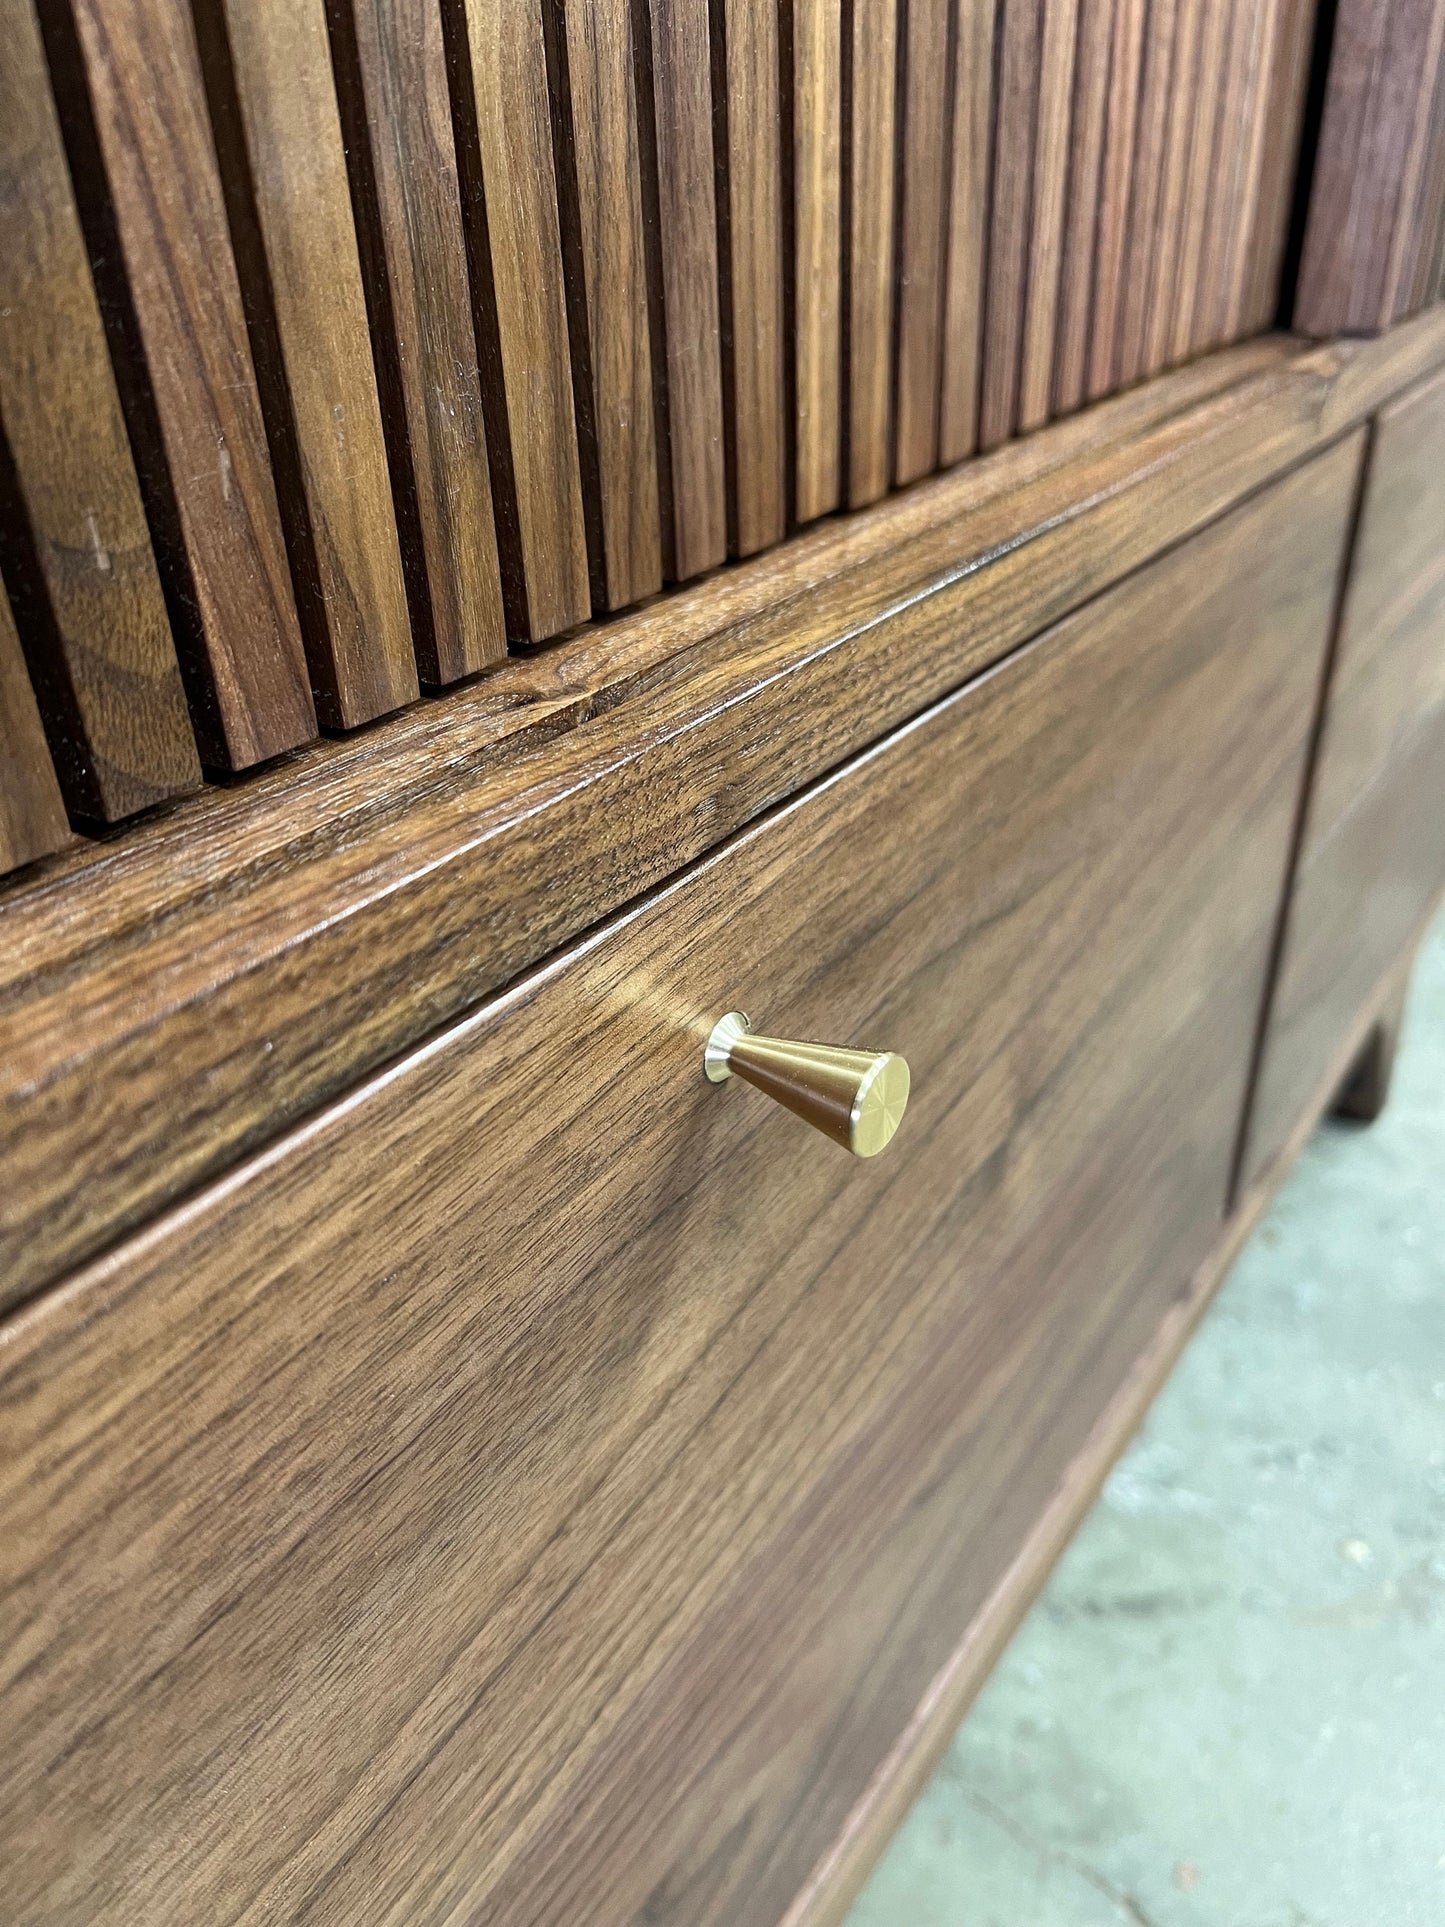 The Palisade Cabinet - Brass drawer knobs - media center, tv stand,